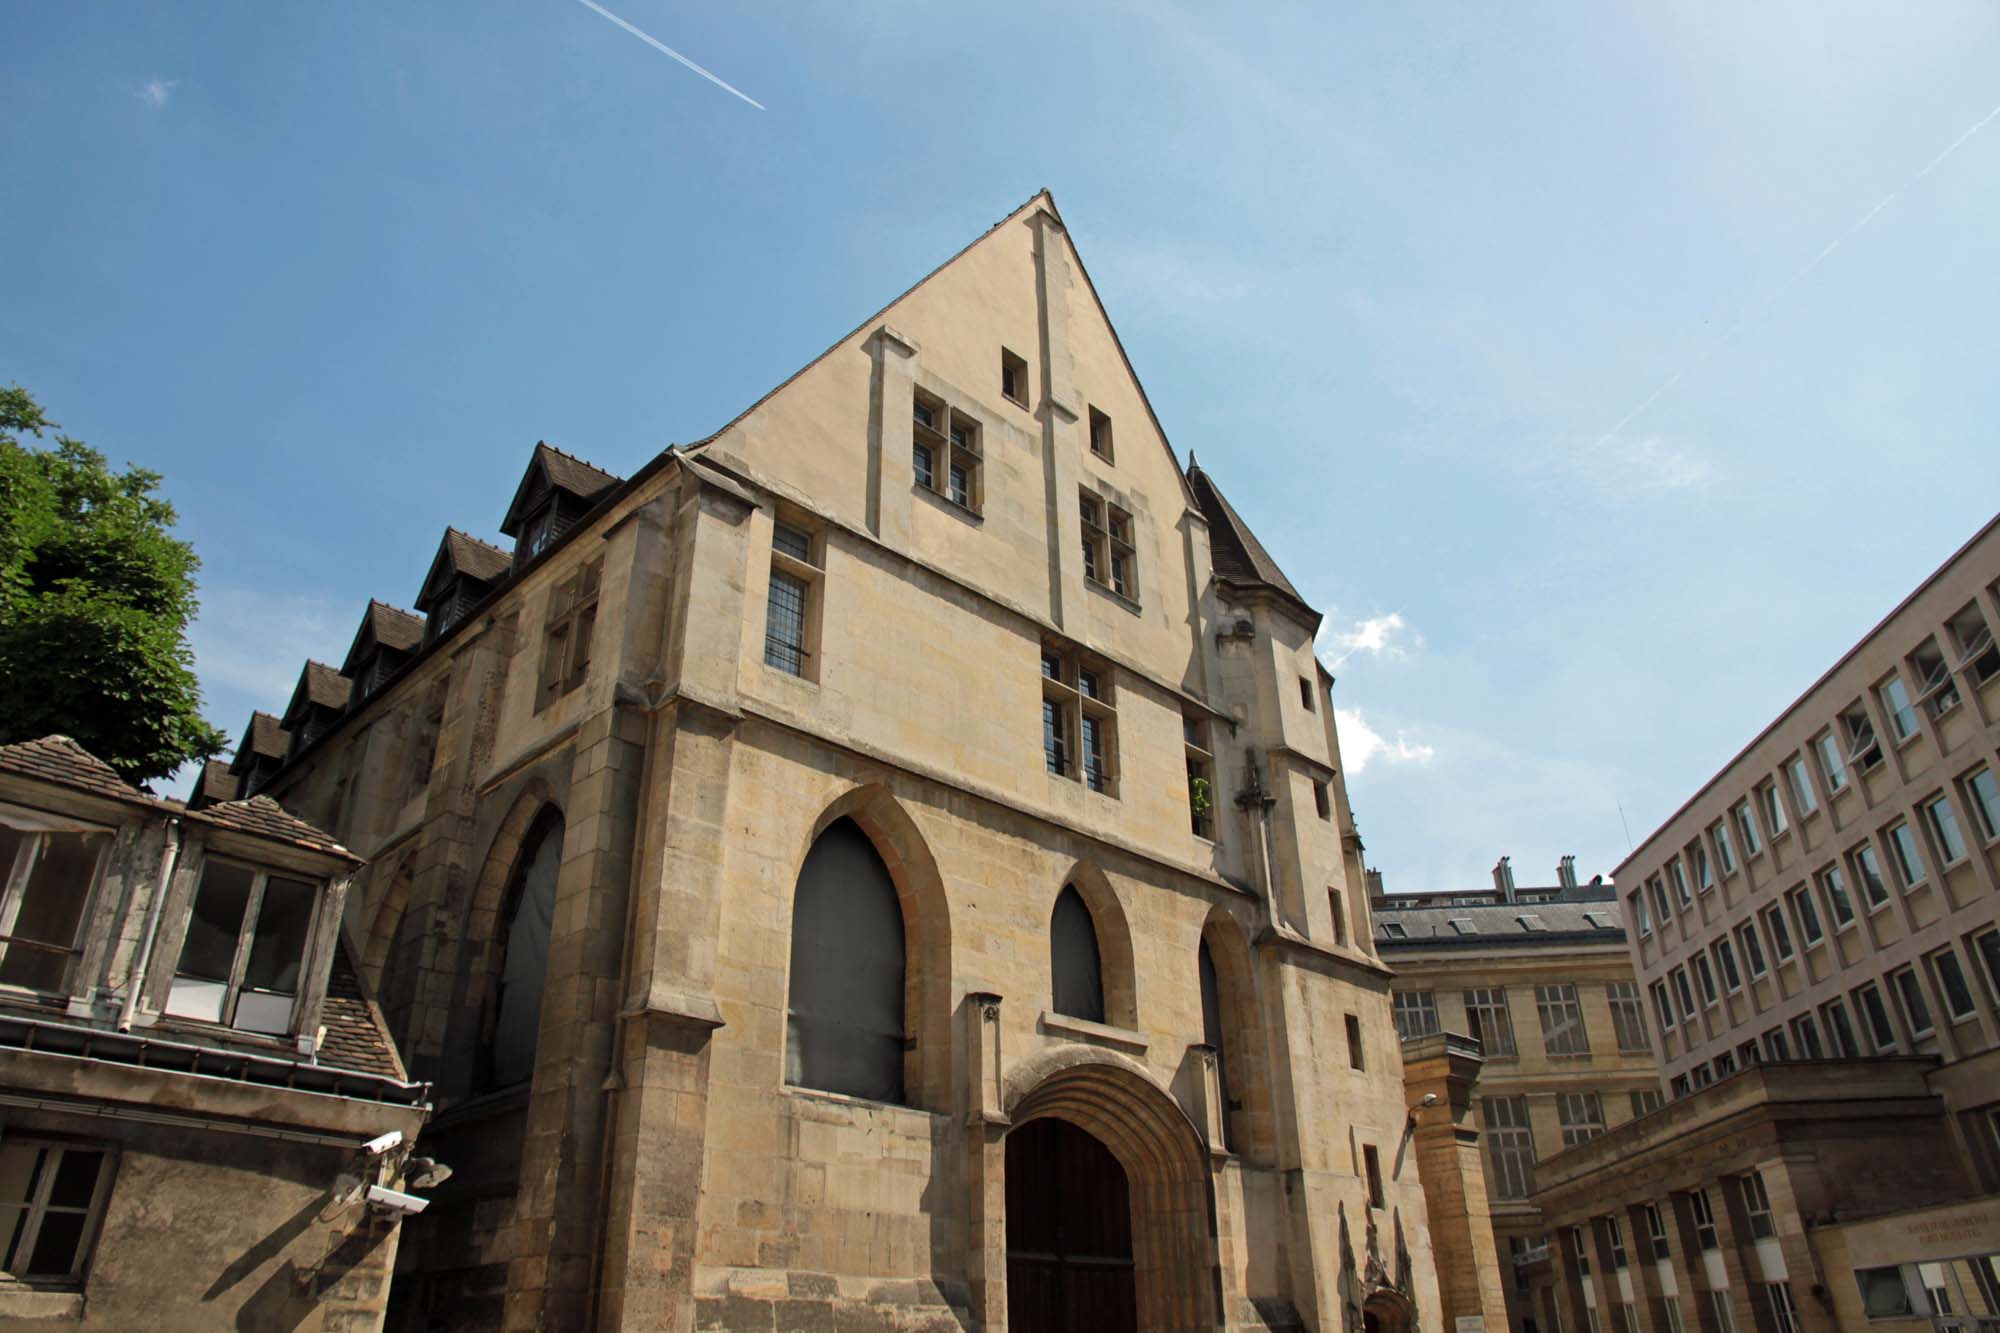 Exterior of the Refectory of the Cordeliers, founded by Jeanne d'Evreux, after 1358